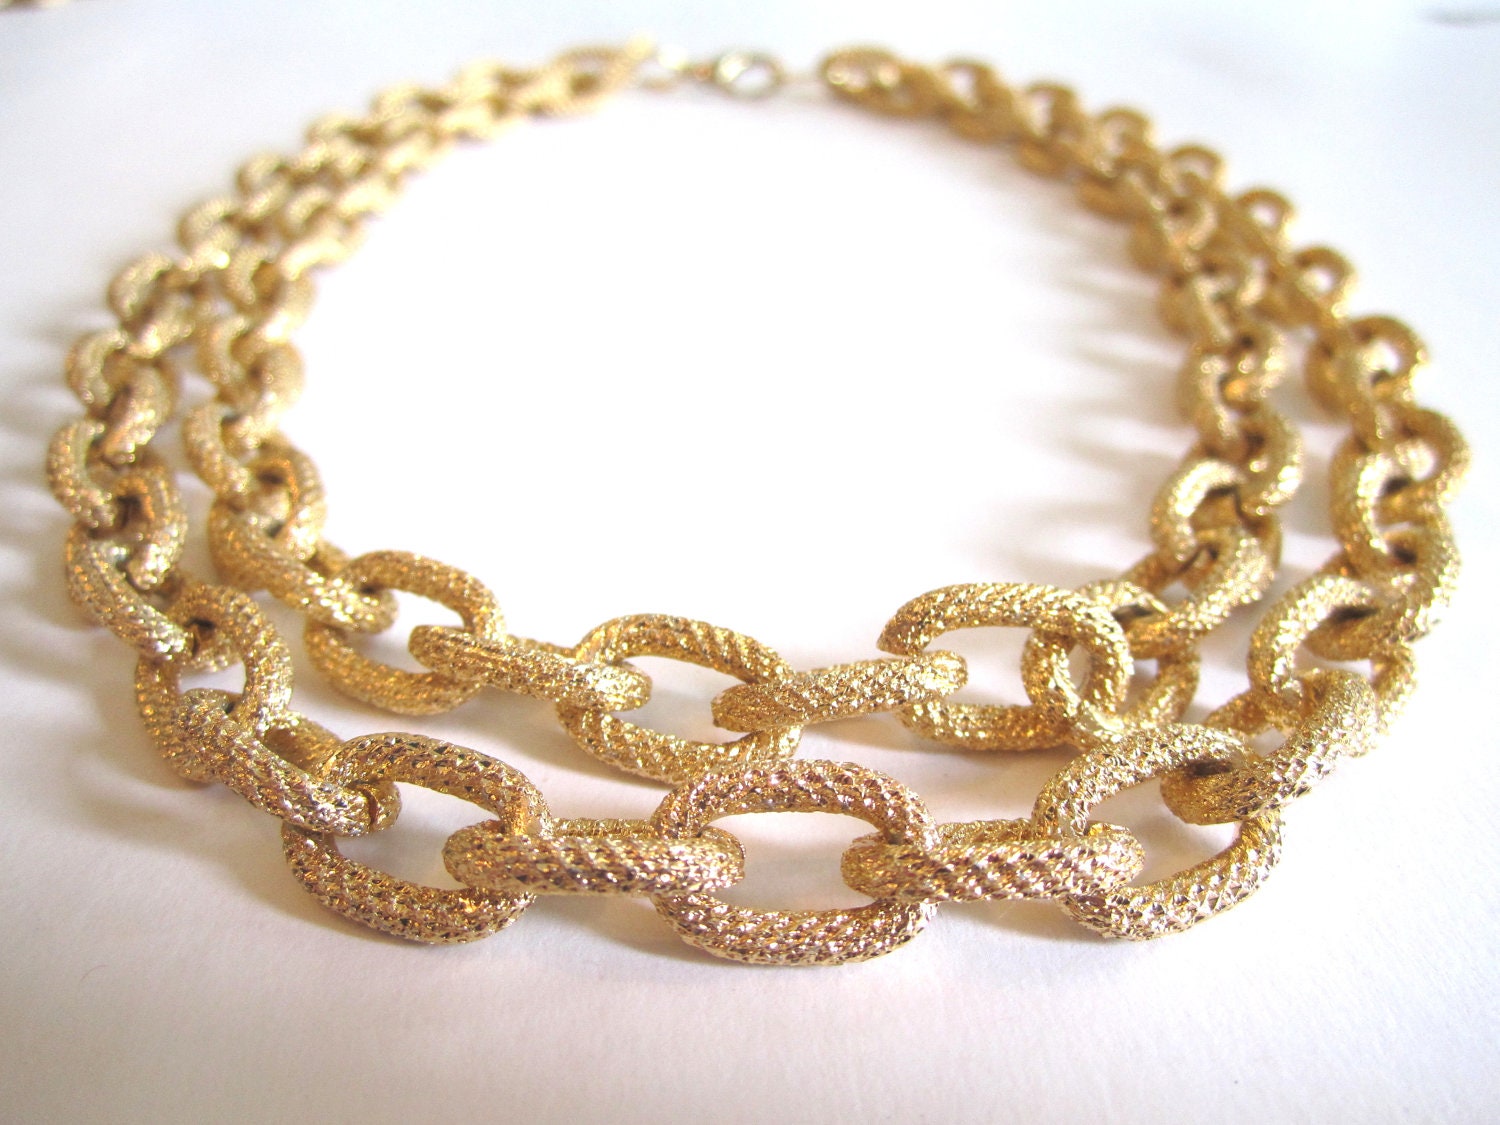 GOLD Faux PAVE Textured Double Chain Necklace